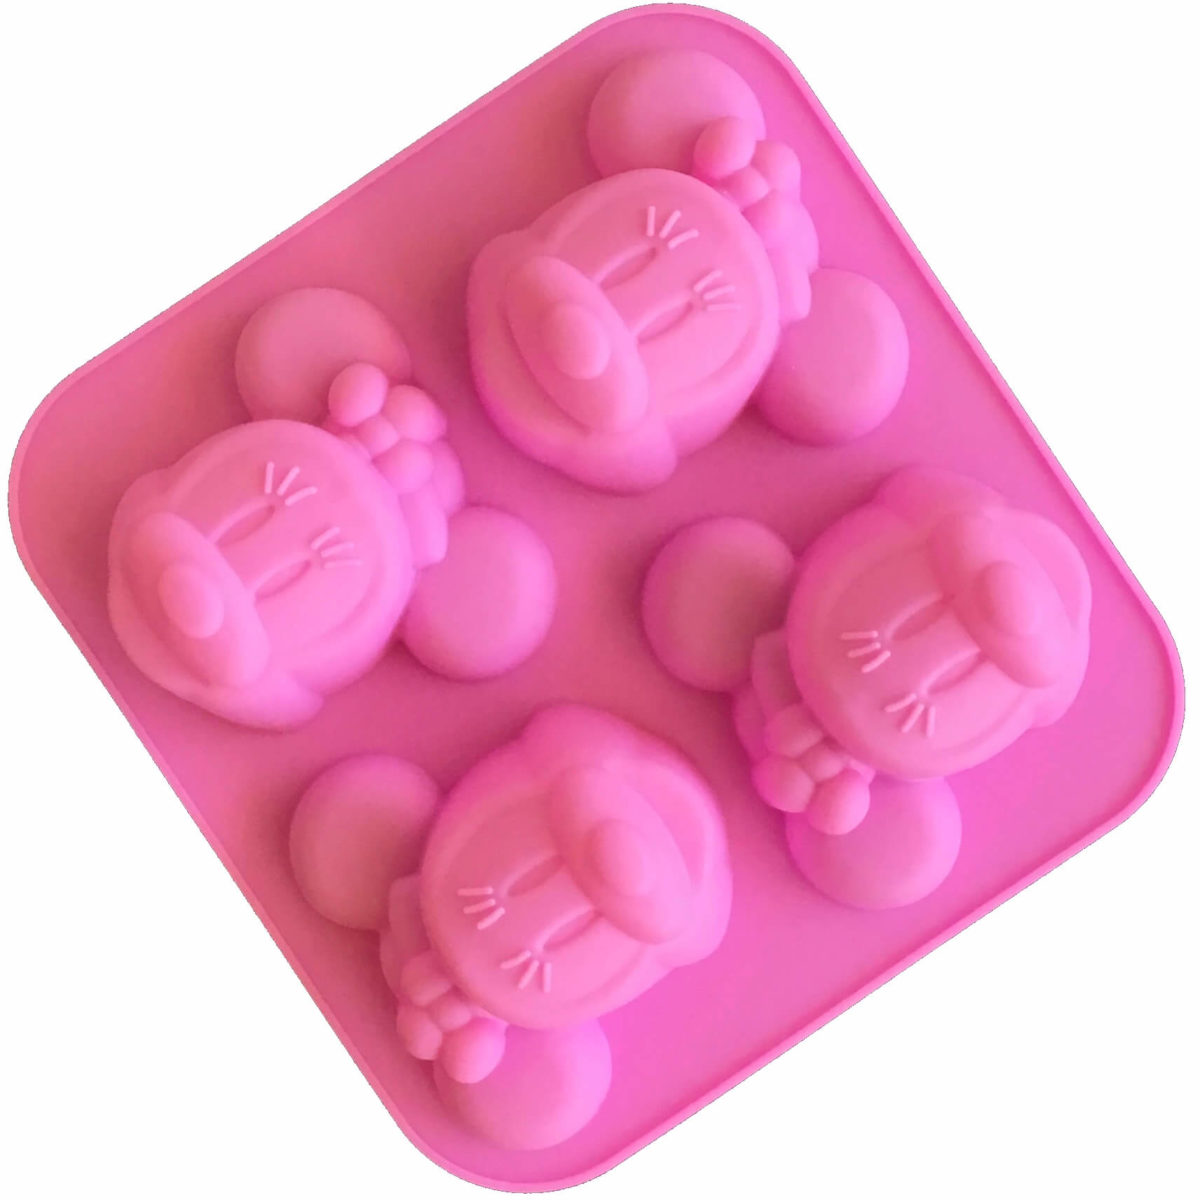 pink four cavity silicone mould with identical minnie mouse cavites